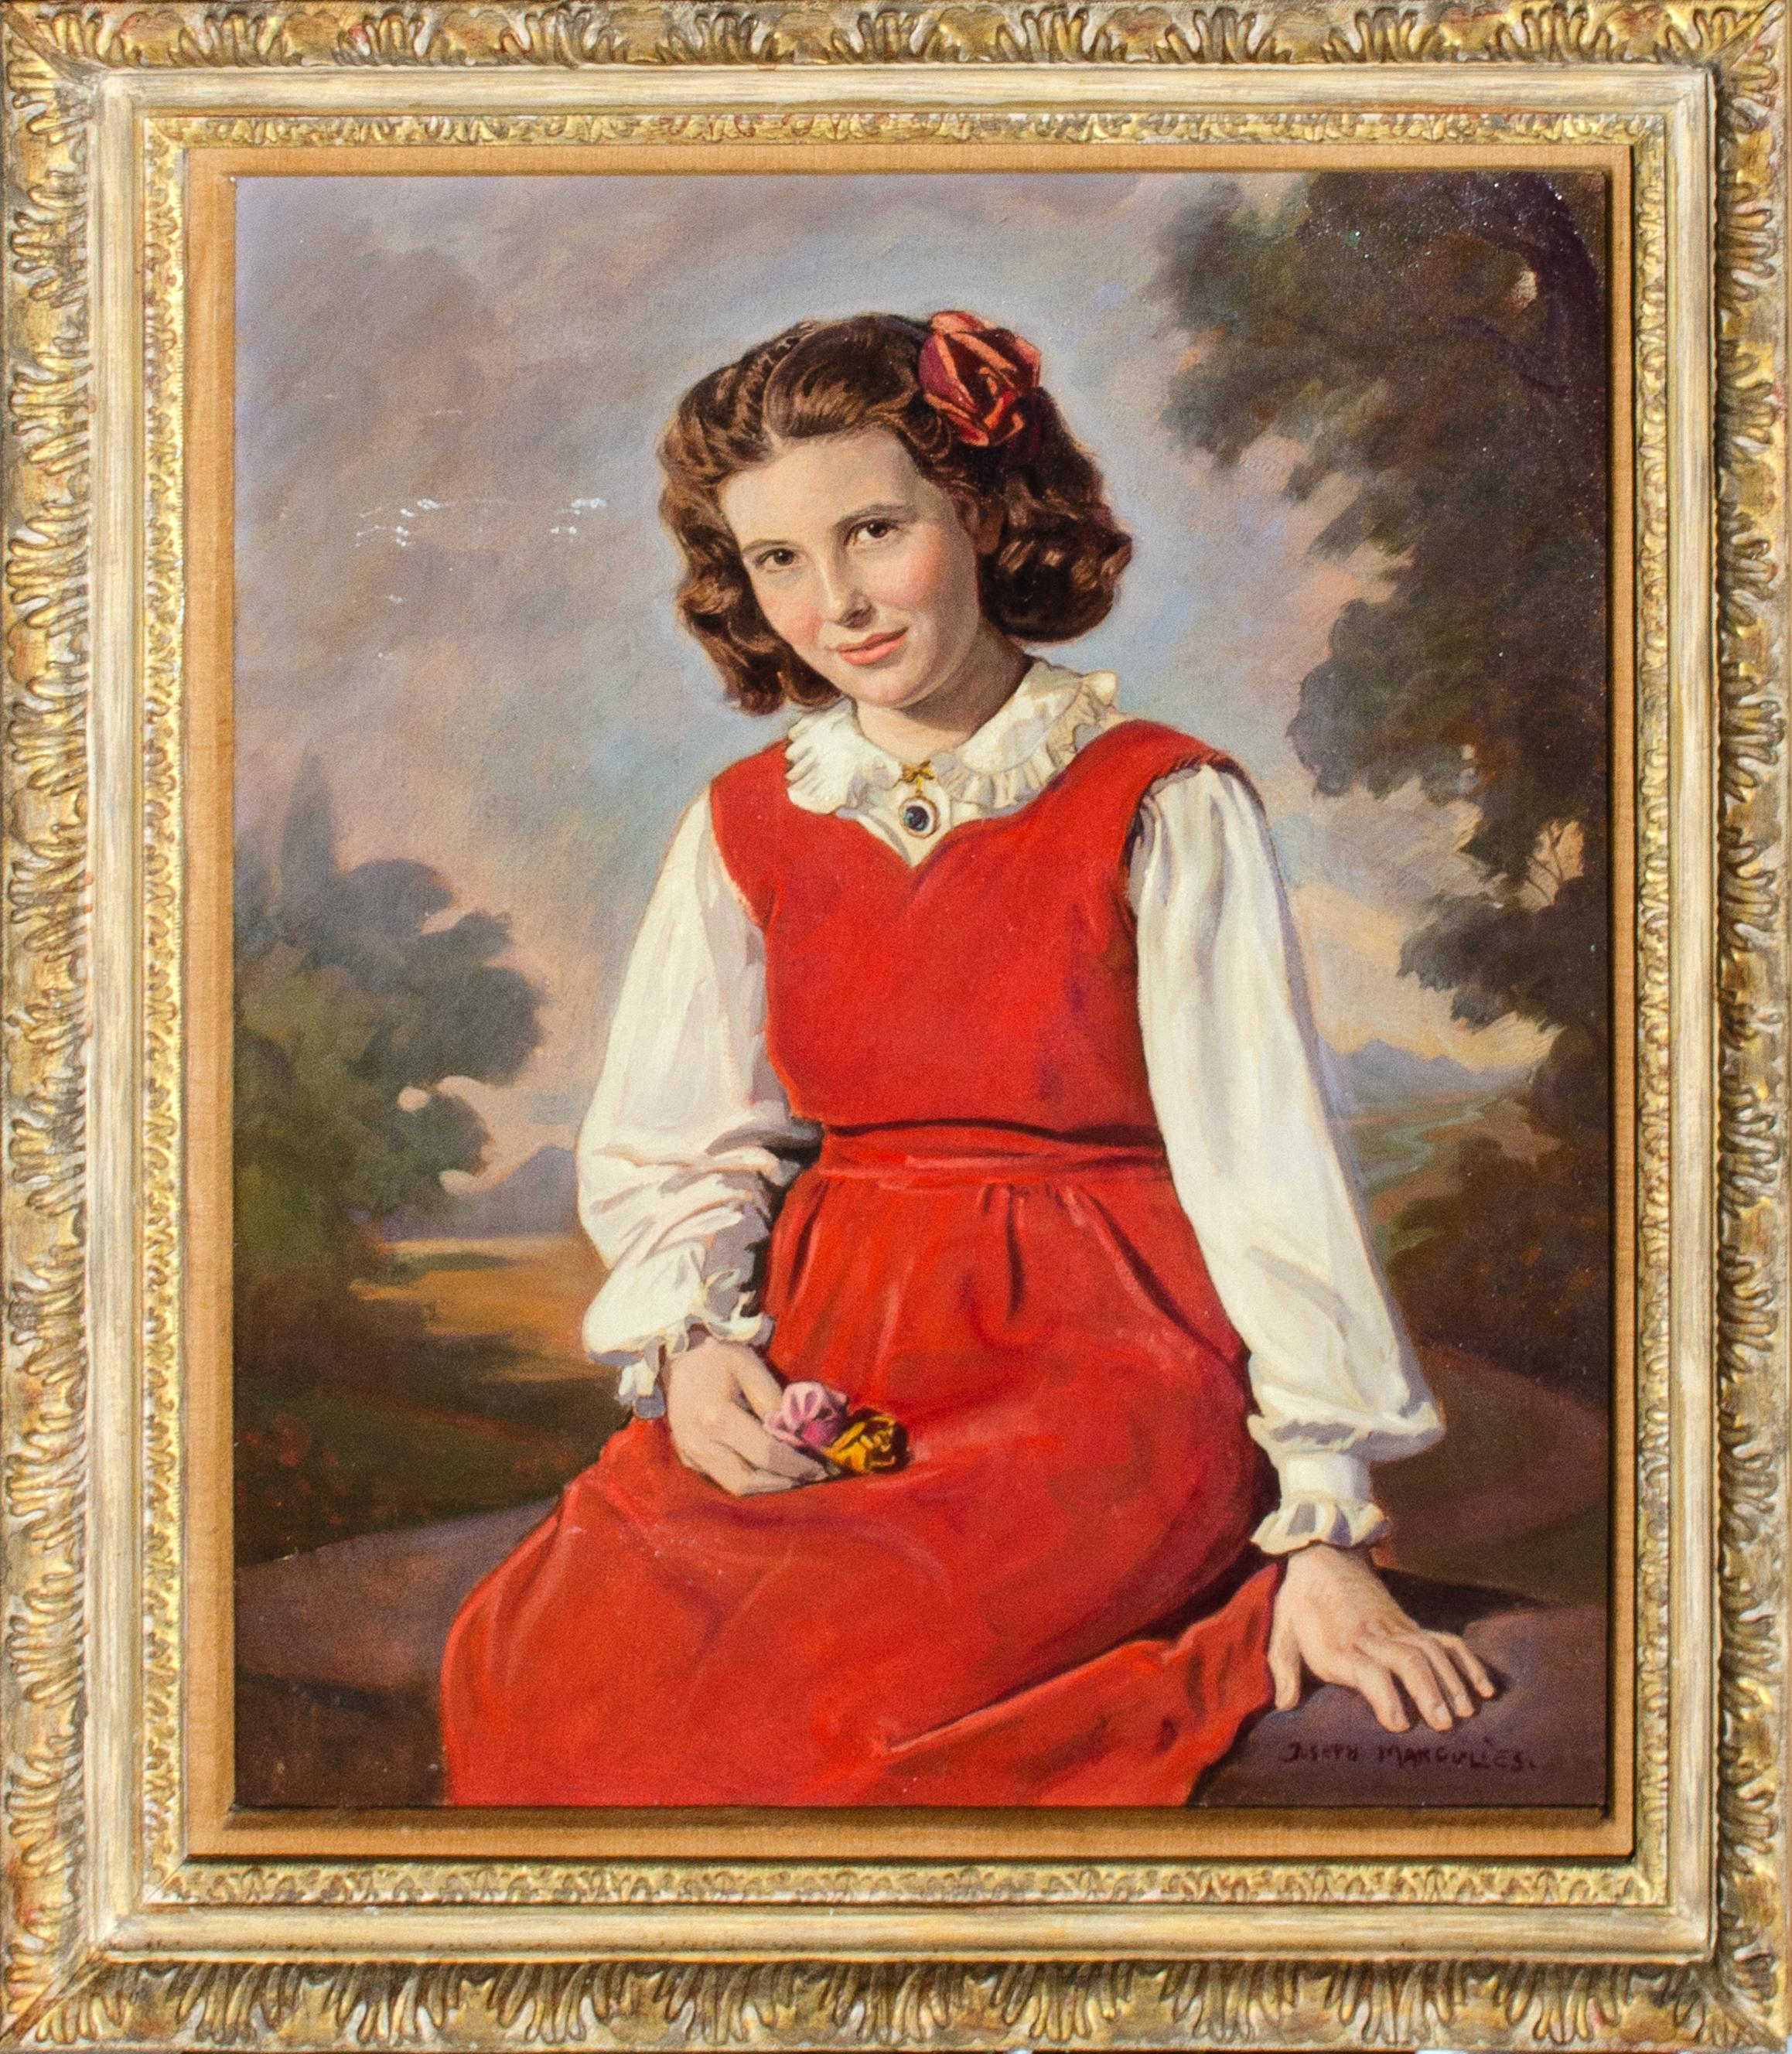 Joseph Margulies (American, 1896-1984)
Untitled (Portrait of a Girl), 20th Century
Oil on canvas (or possibly linen?)
29 3/4 x 25 in.
Framed: 33 3/4 x 26 x 1 1/2 in.
Signed lower right: Joseph Margulies

Born in Vienna, Joseph Margulies became a